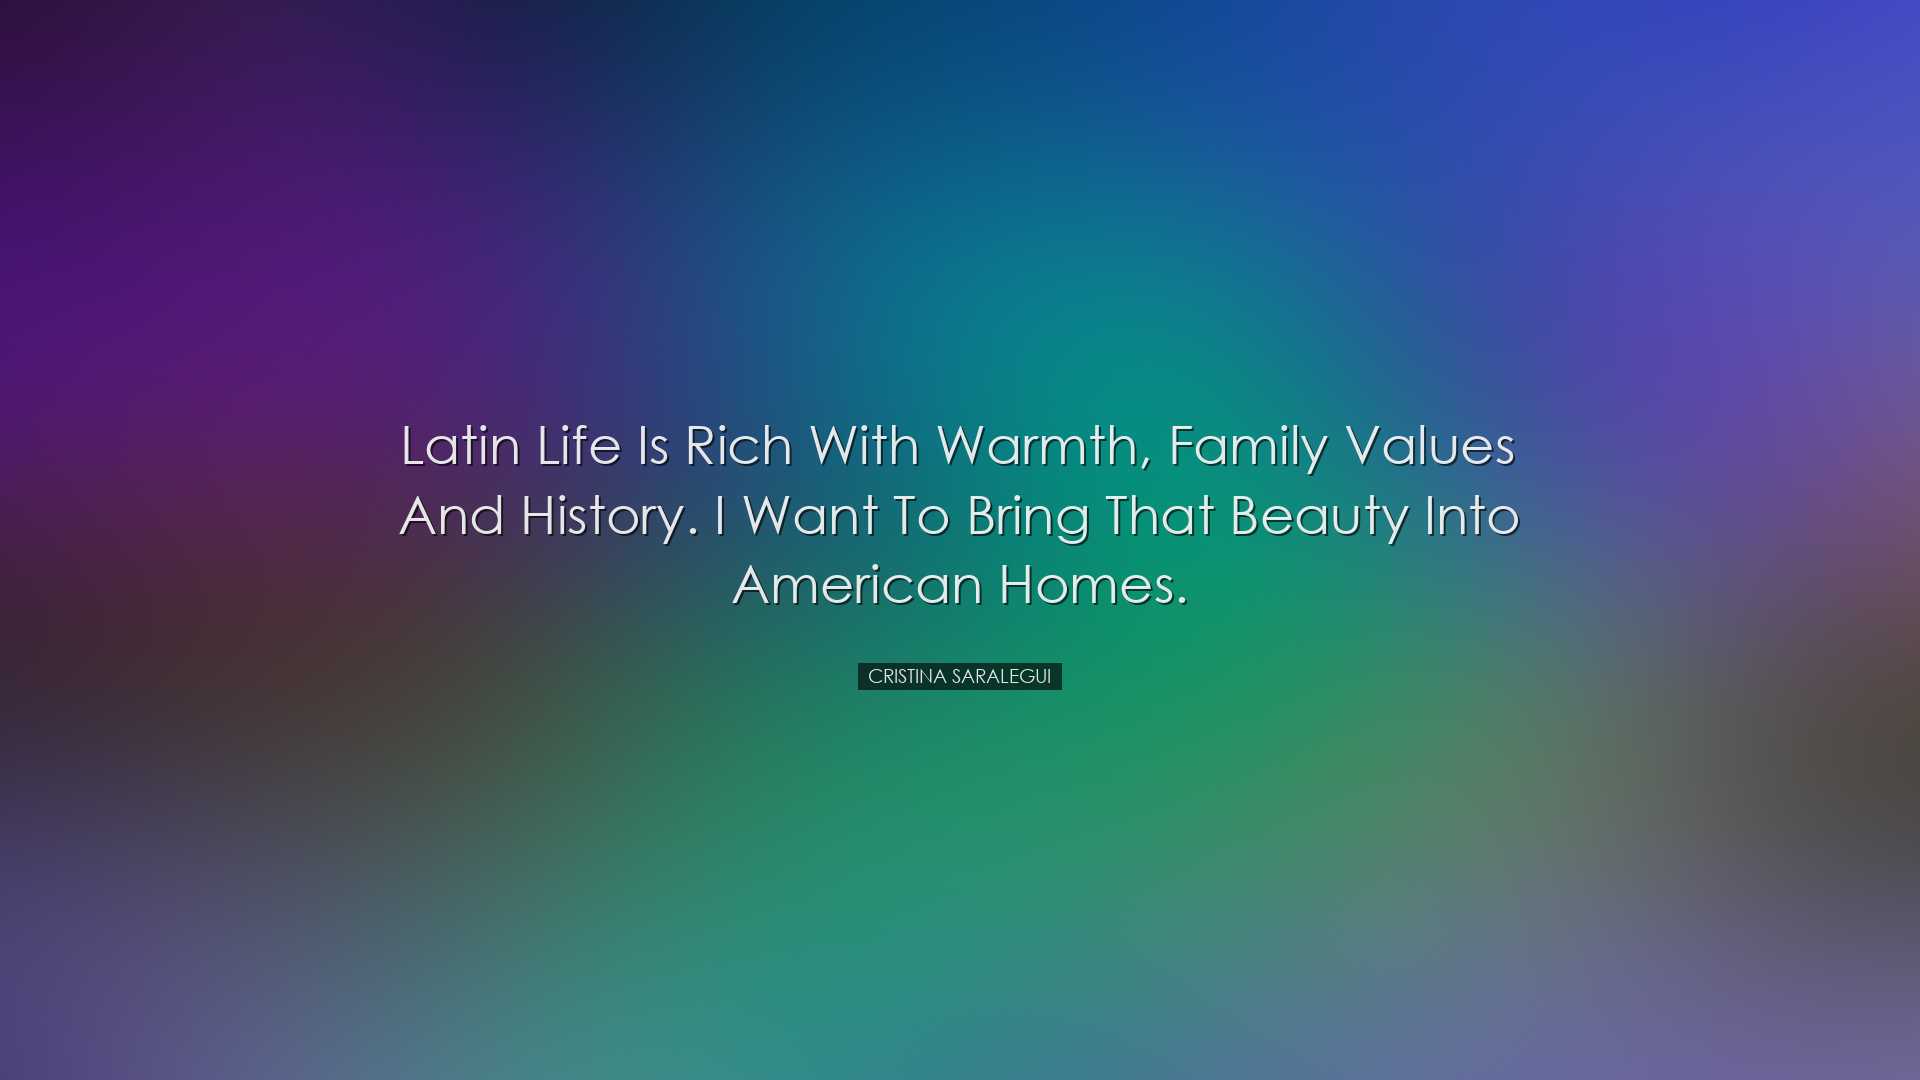 Latin life is rich with warmth, family values and history. I want